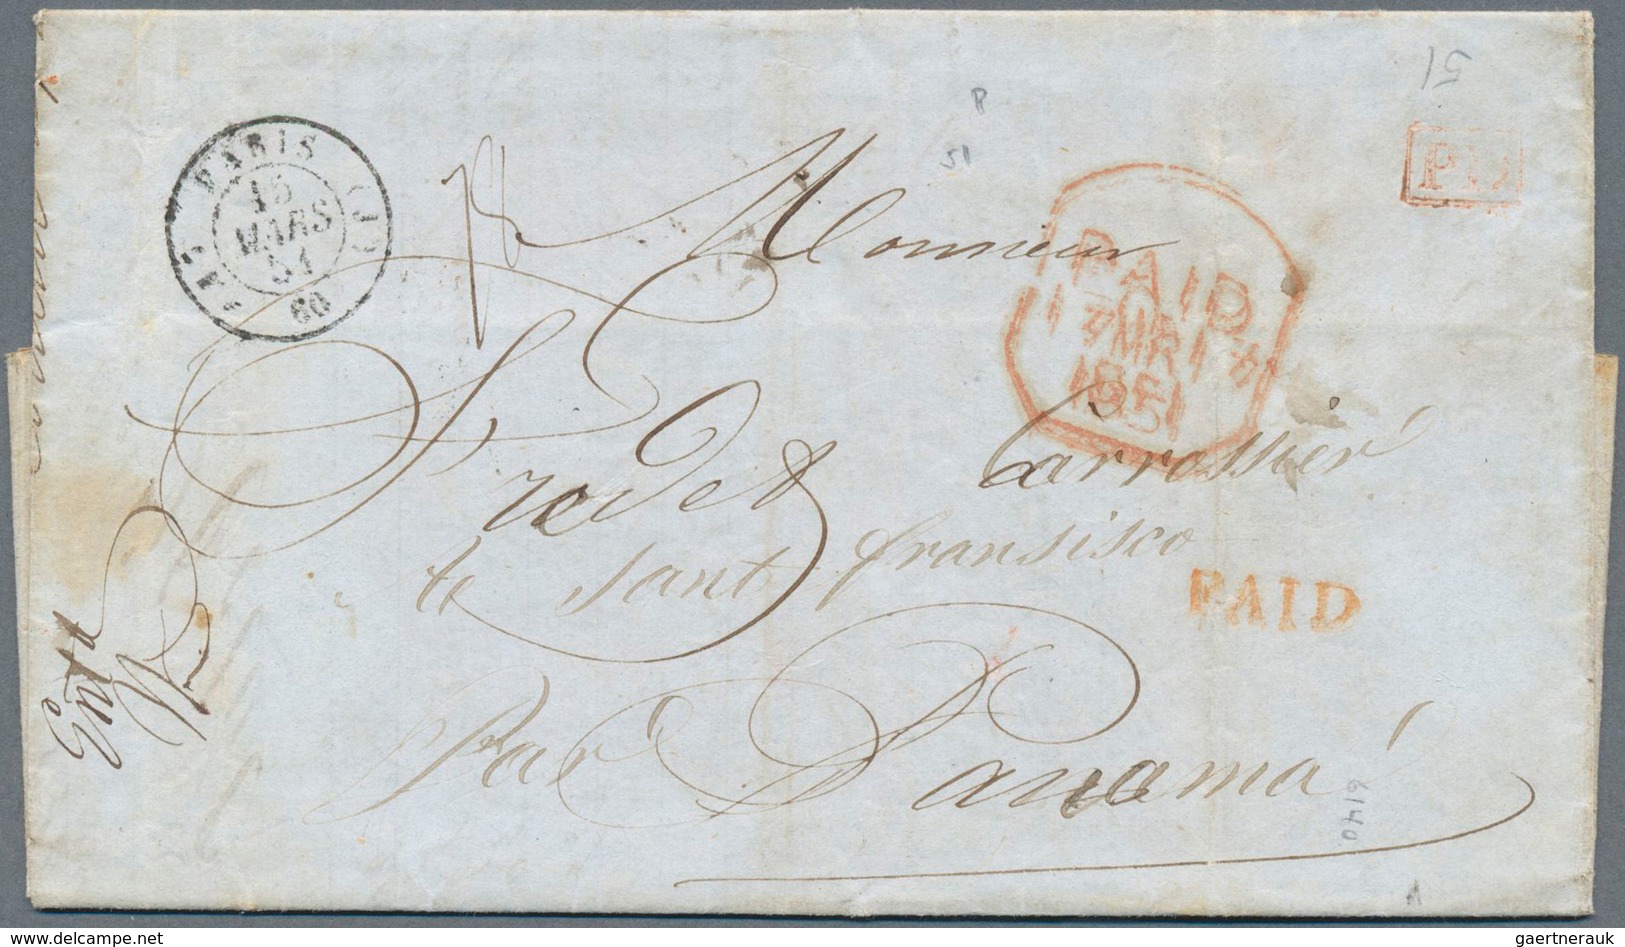 Vereinigte Staaten von Amerika: 1851/1880, seven folded letters and one stationery envelope sent fro